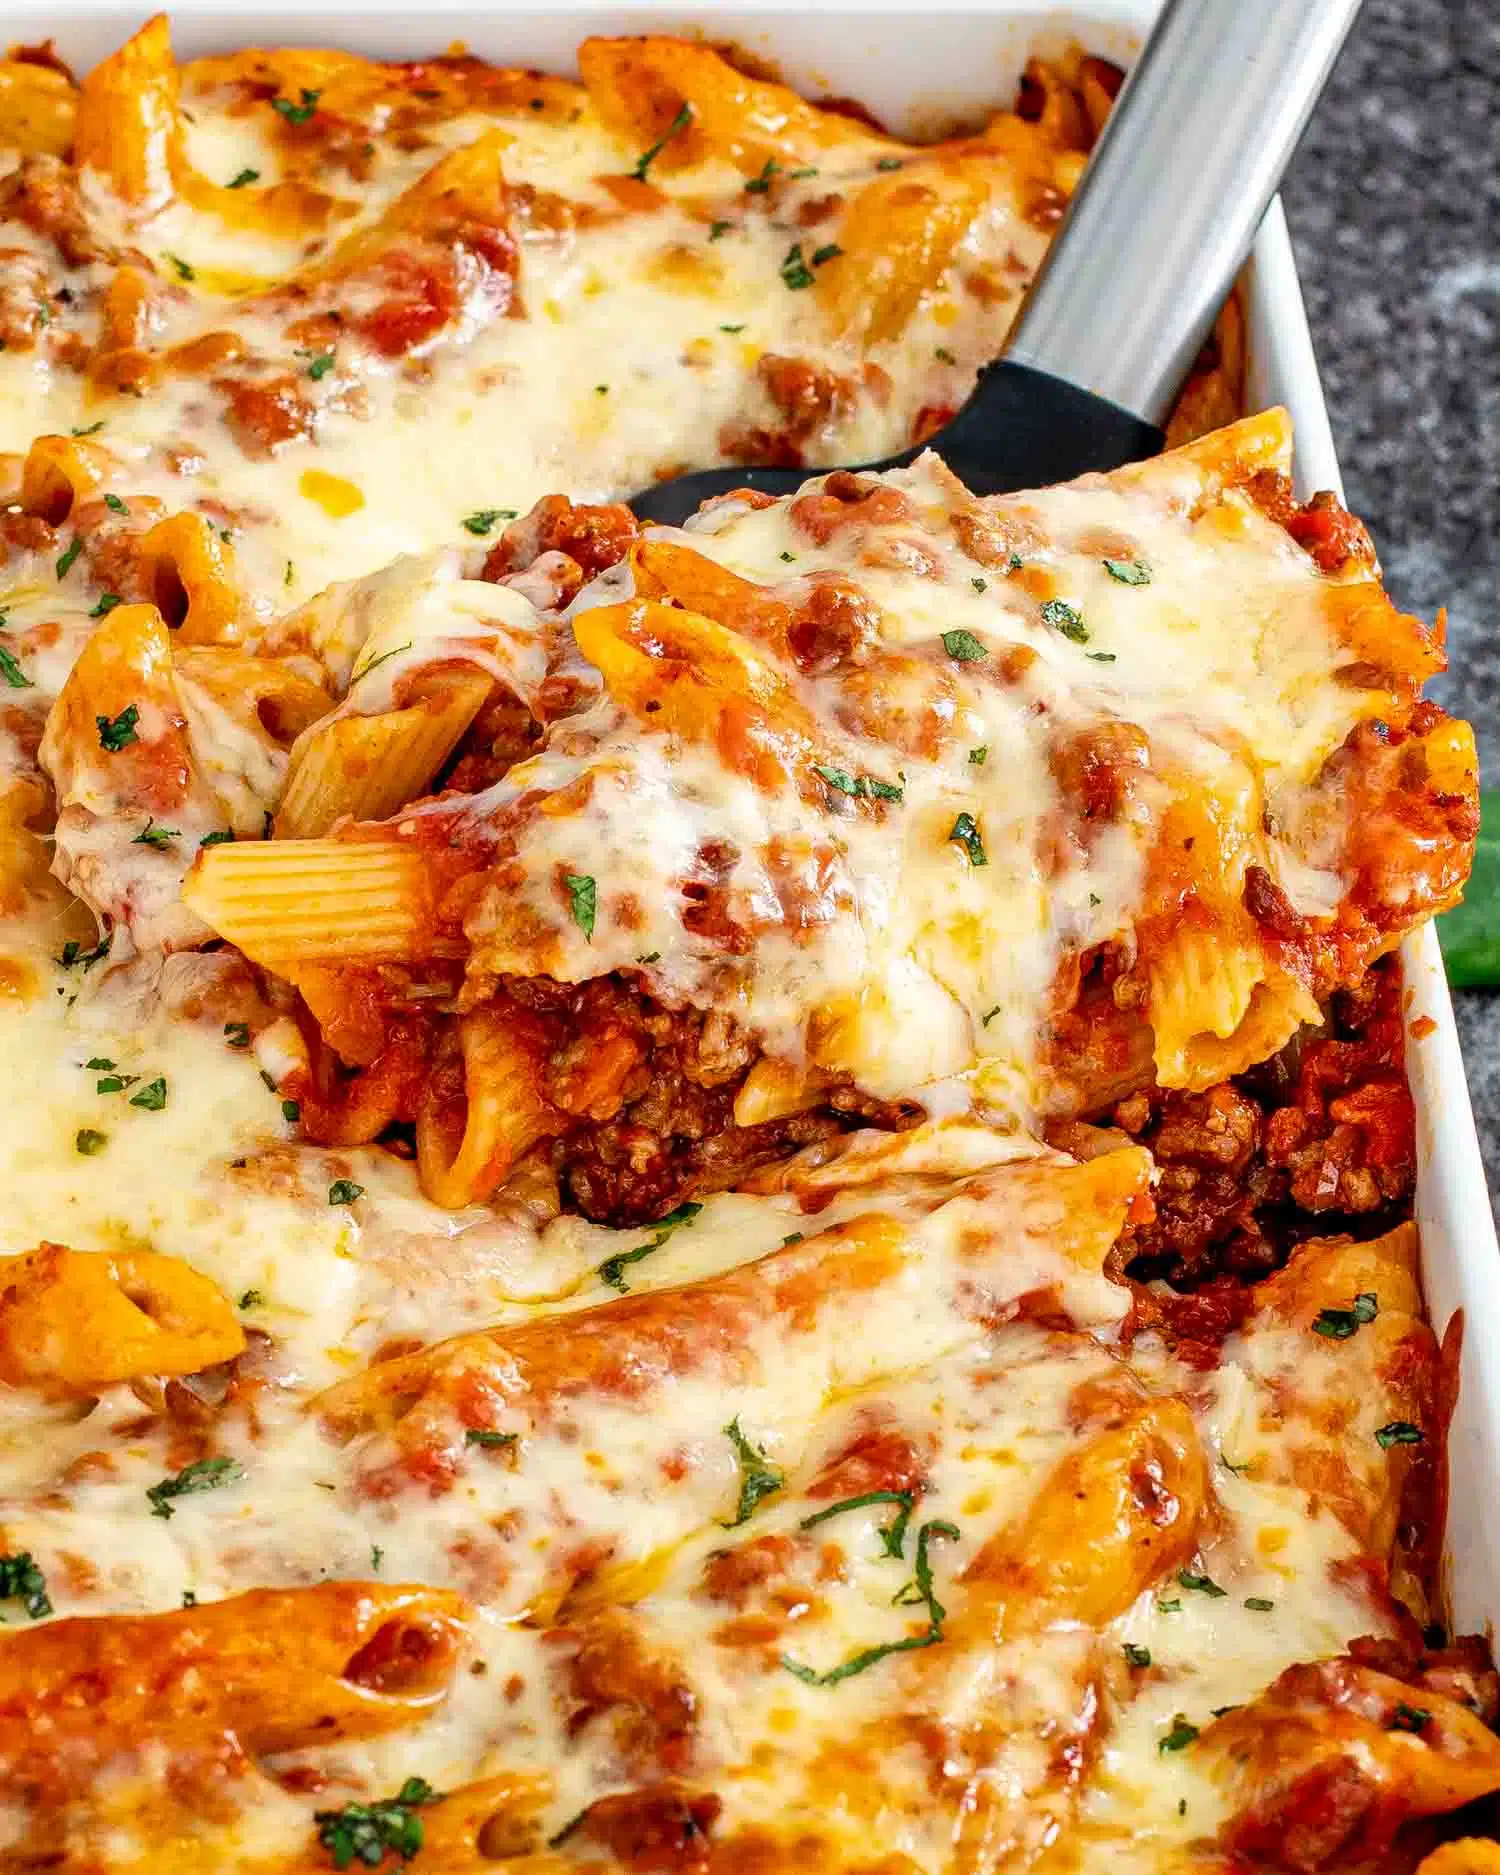 freshly baked mostaccioli in a white casserole dish.